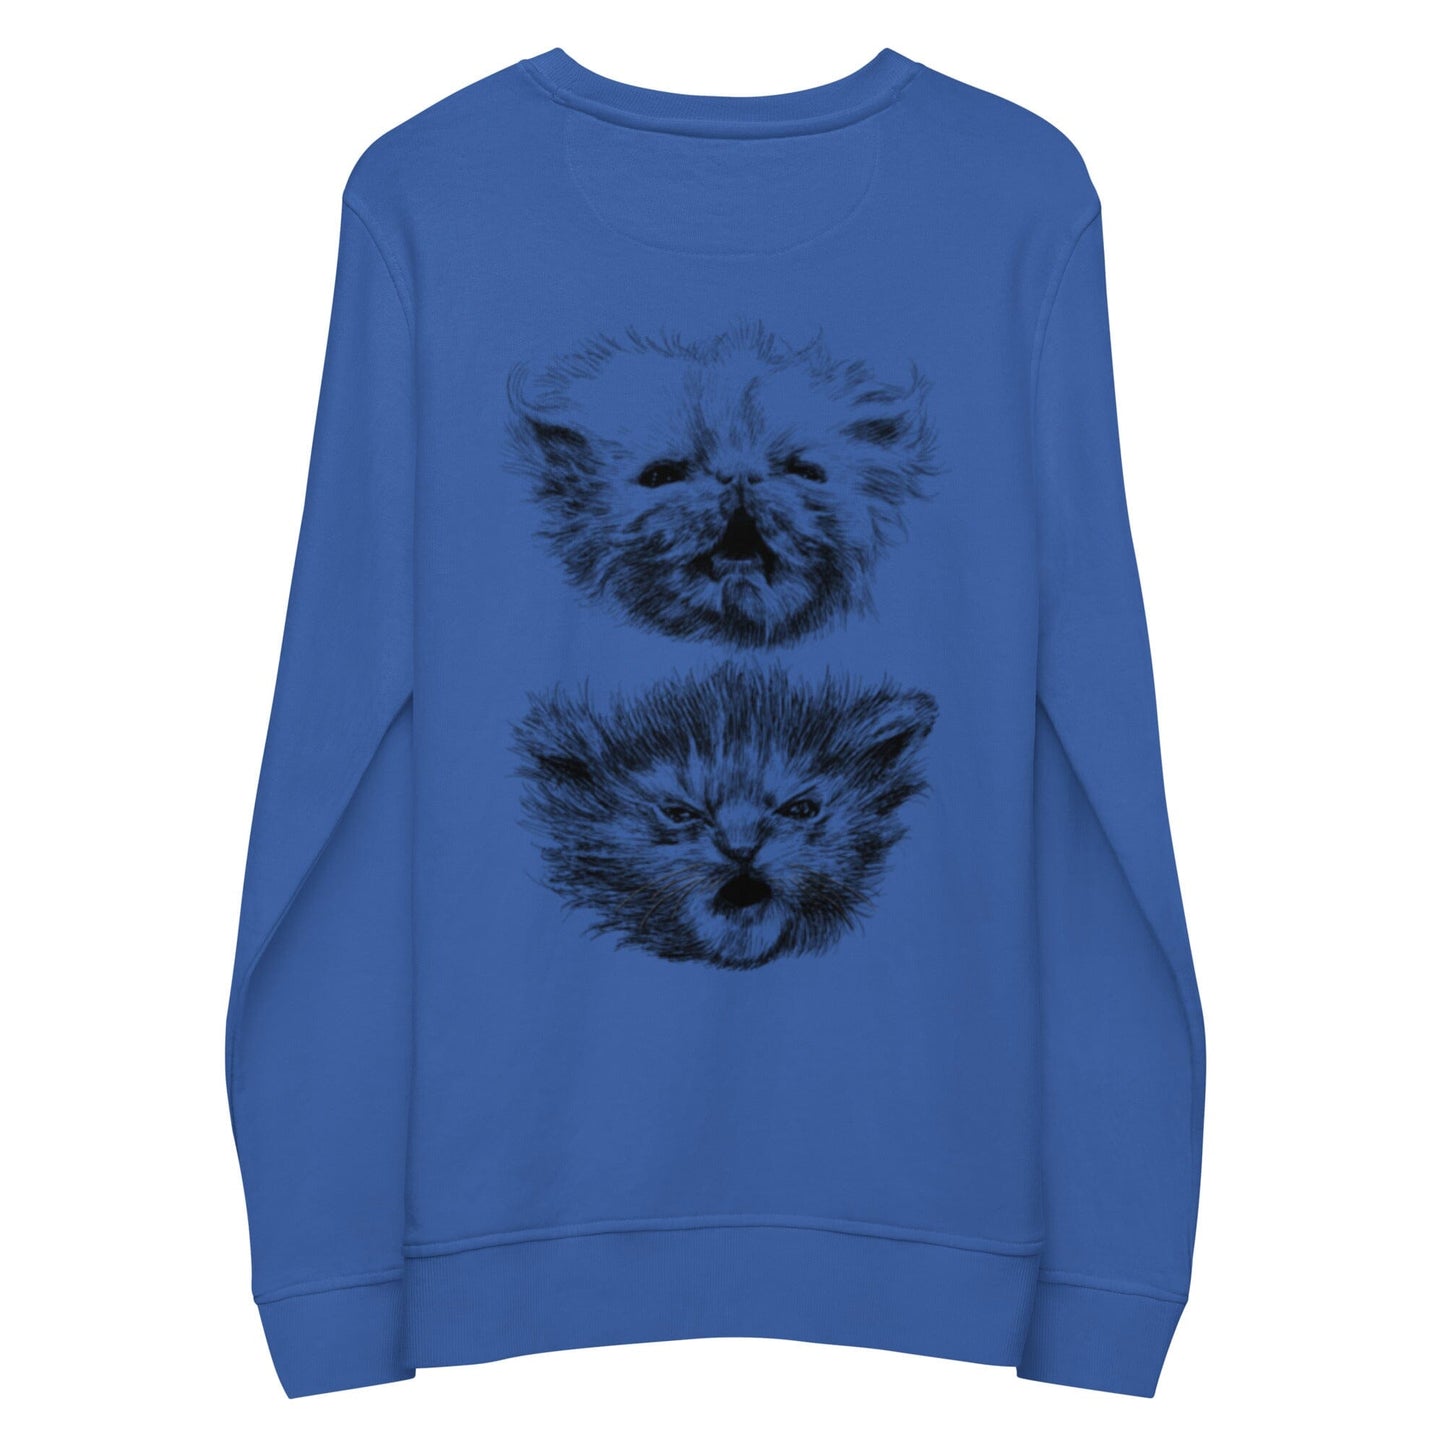 WispTot Sweatshirt [Unfoiled] (All net proceeds go to equally to Kitty CrusAIDe and Rags to Riches Animal Rescue) JoyousJoyfulJoyness 